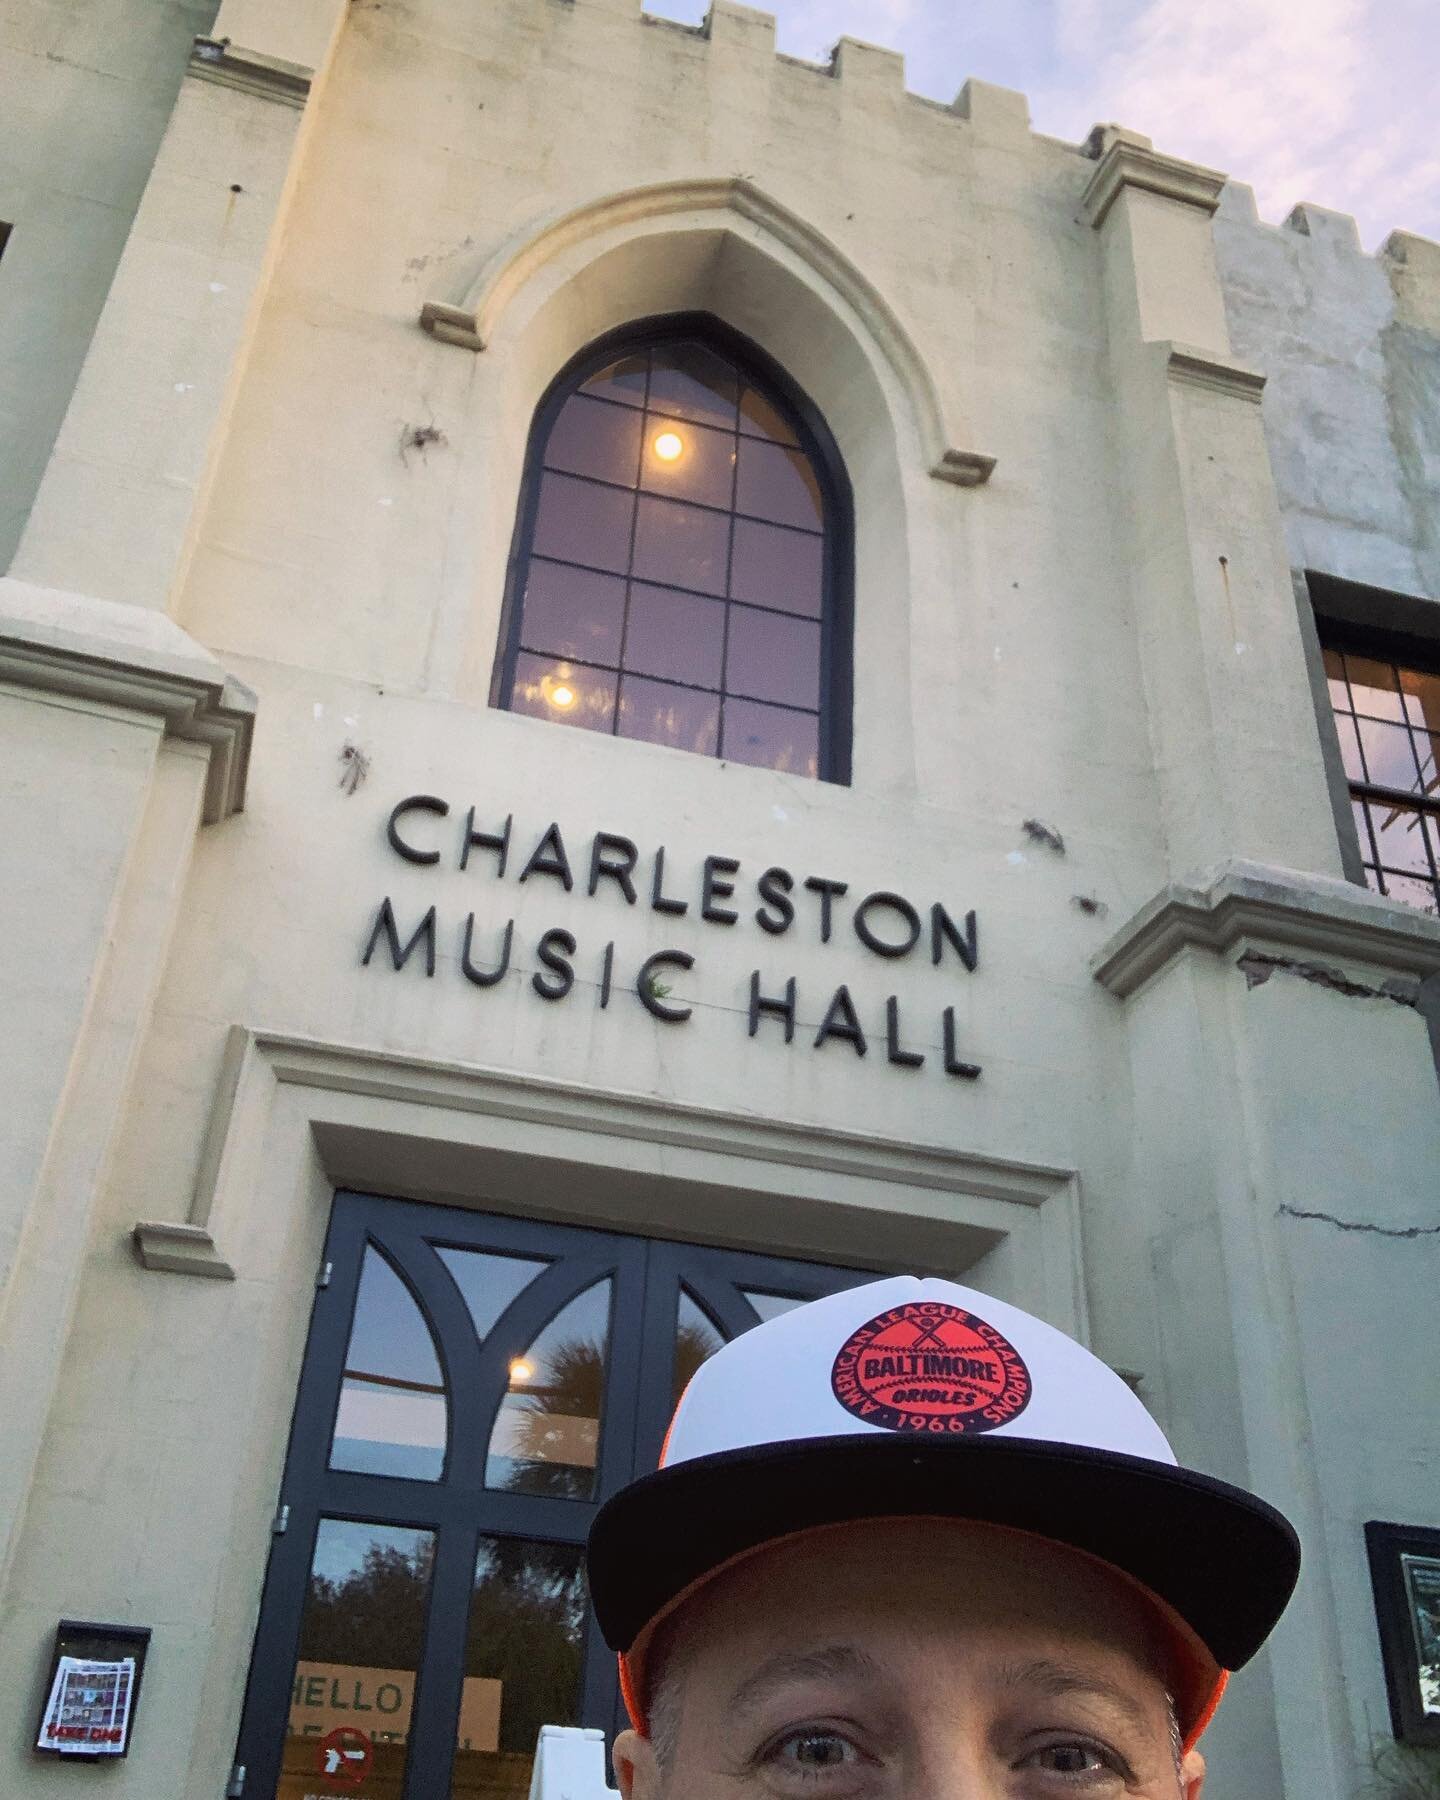 the last trip i took before the #pando was a solo writing retreat to #charleston. who knew what the next four years would be. oy! so grateful to be back and at such a gorgeous #historic venue @chsmusichall 
yall do it right here!!
.
also i ate my fir